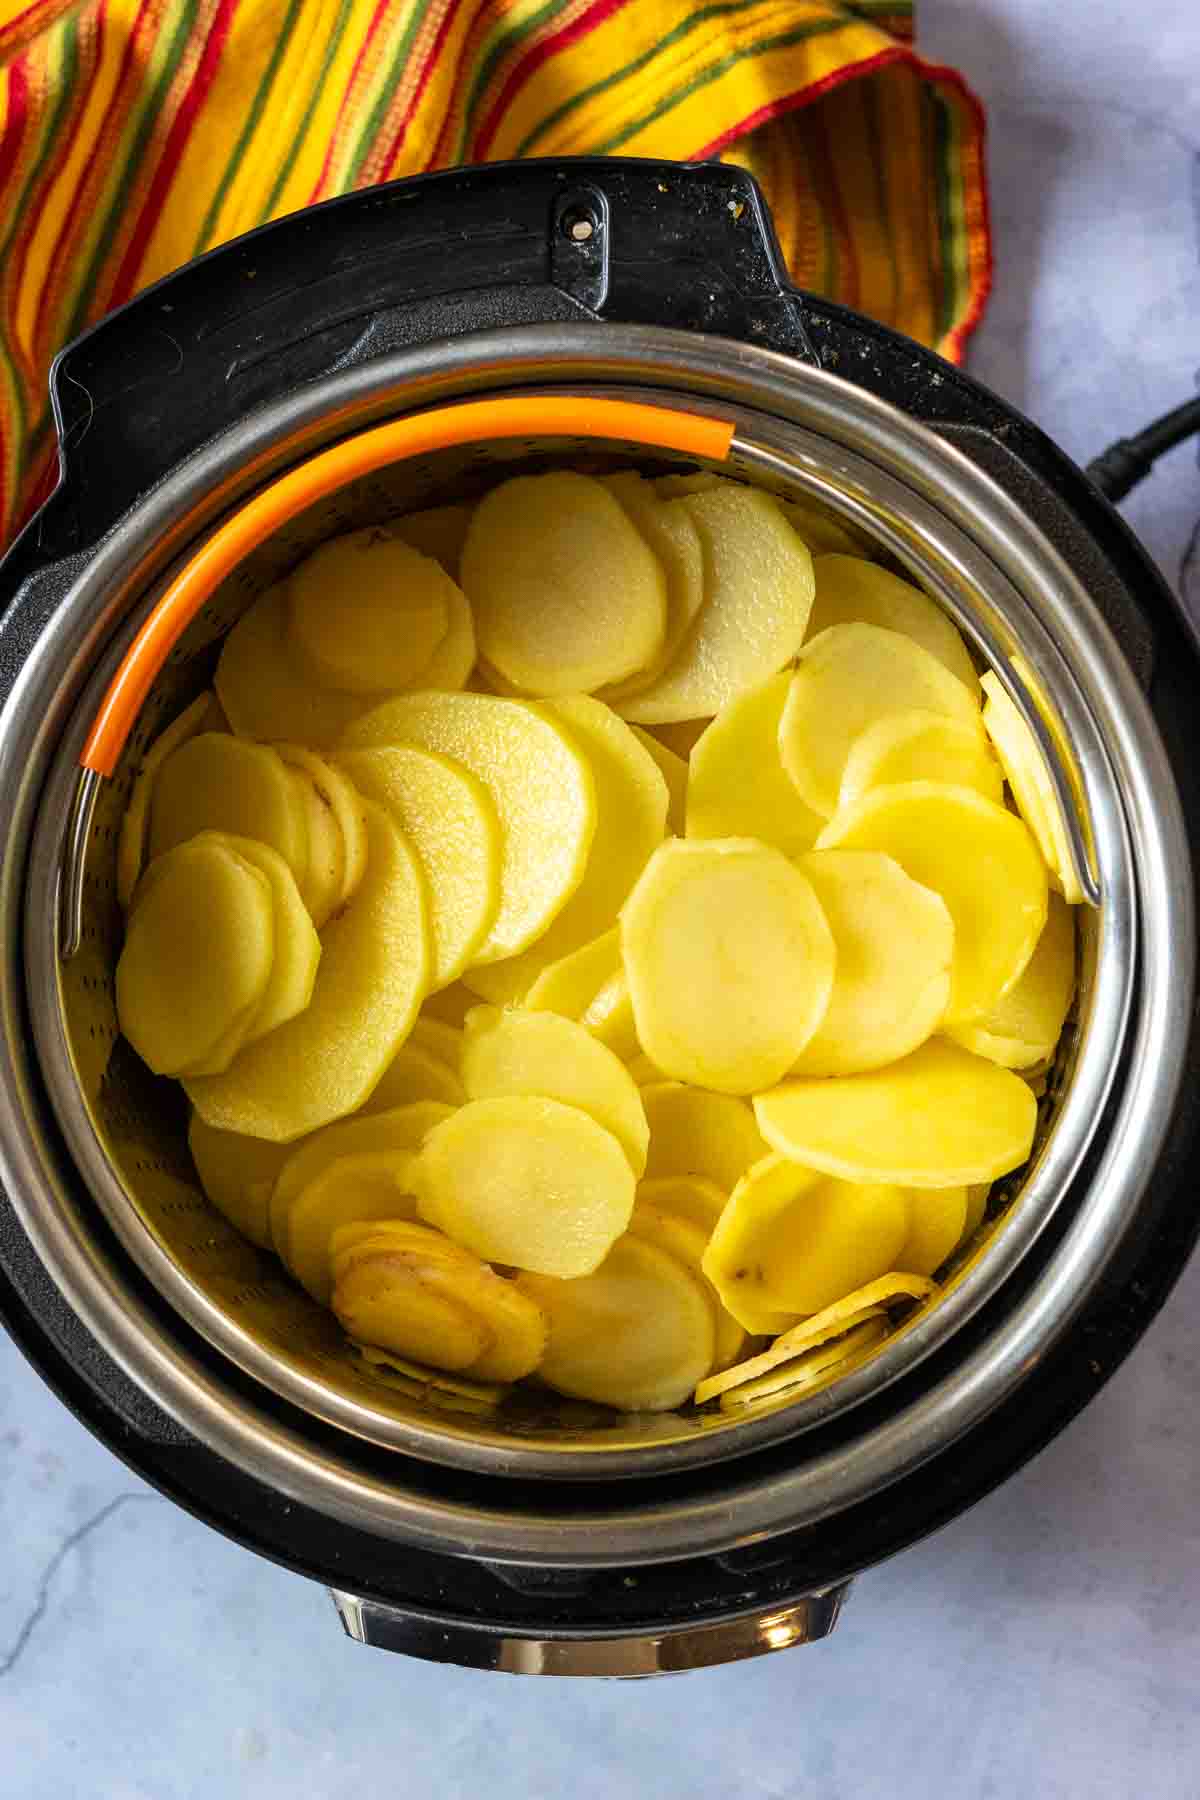 Cooking sliced potatoes in the Instant pot to make instant pot scalloped pottoes.